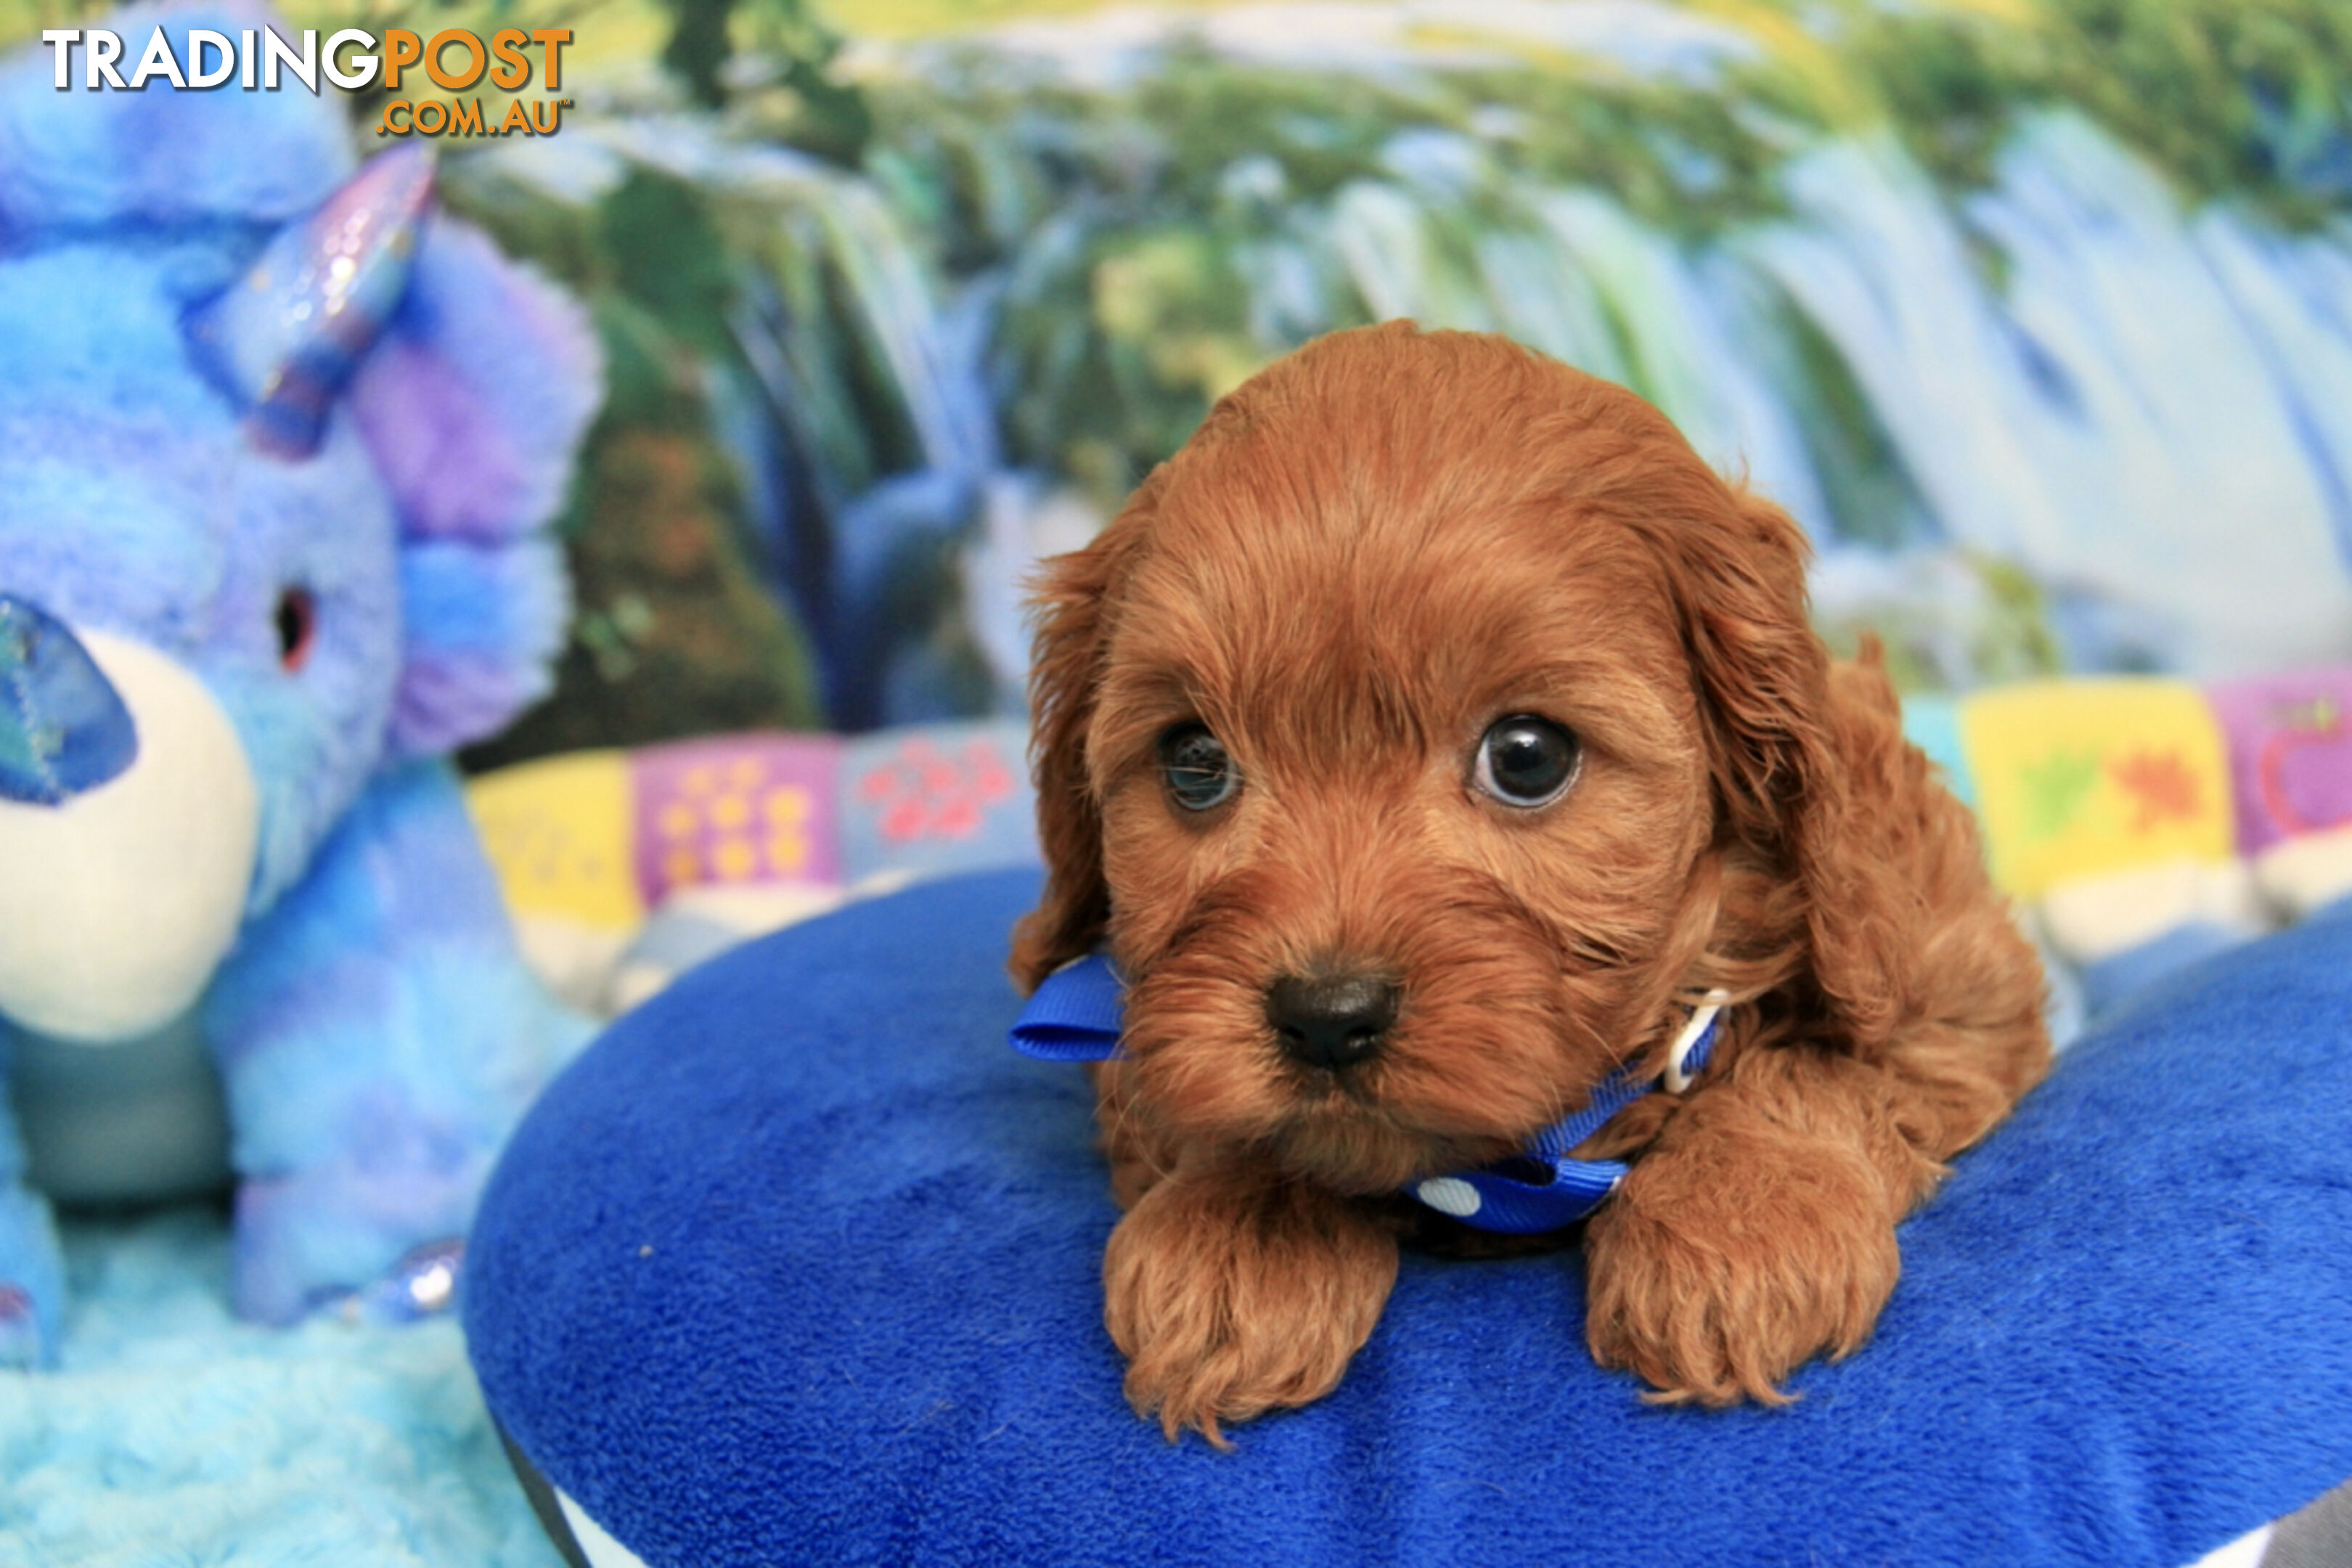 CAVOODLES - 2 X OUTSTANDING SMALL RED MALES  - PARENTS DNA CLEAR